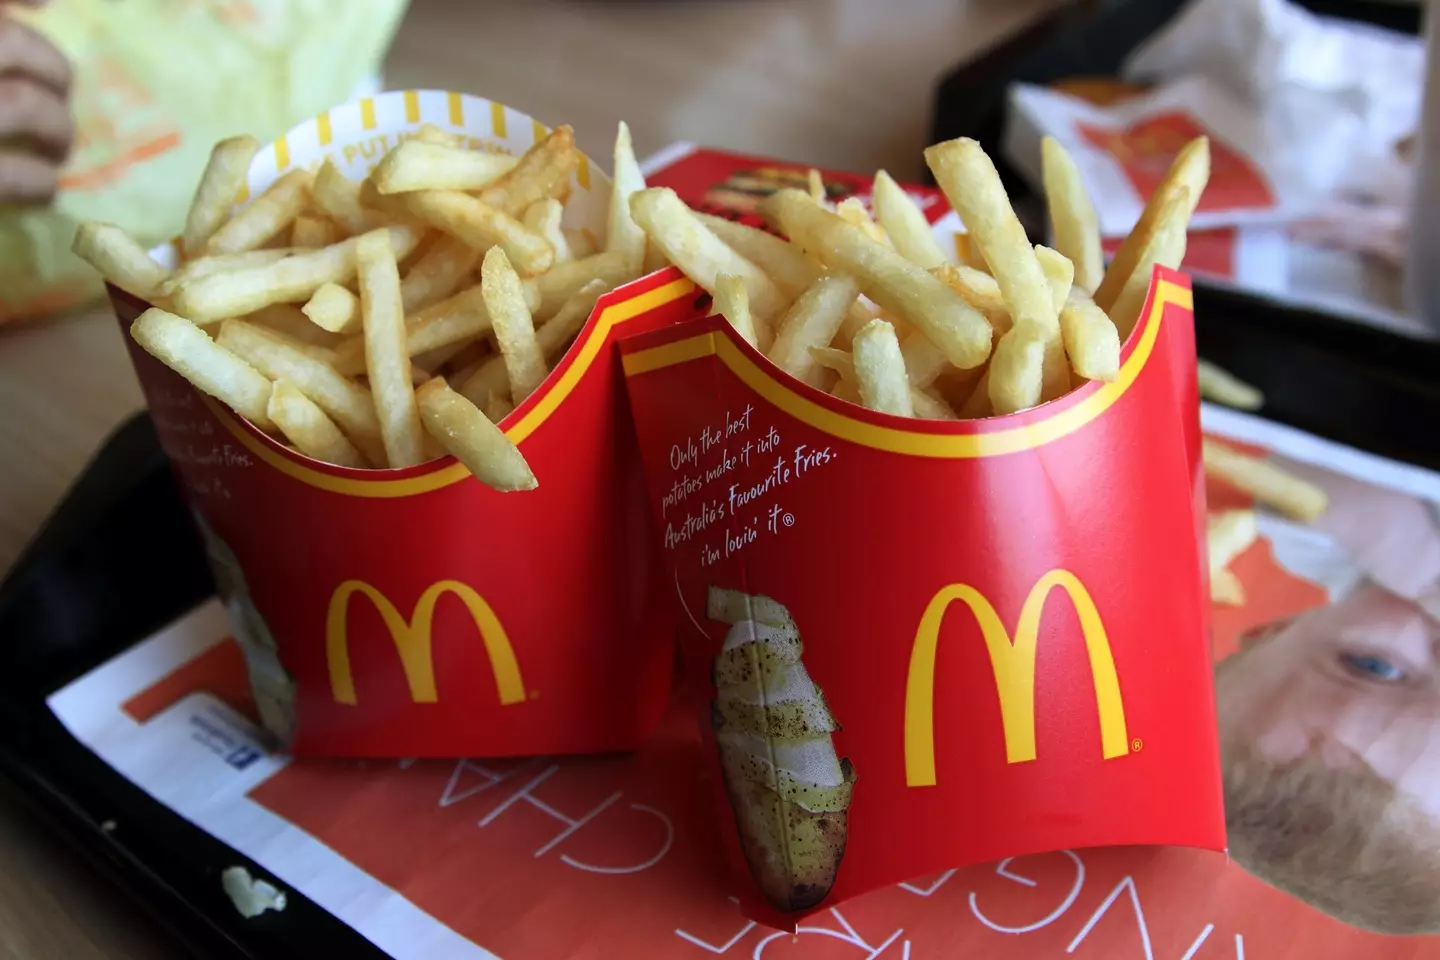 The McDonald's worker explained how to get fresh fries every time.